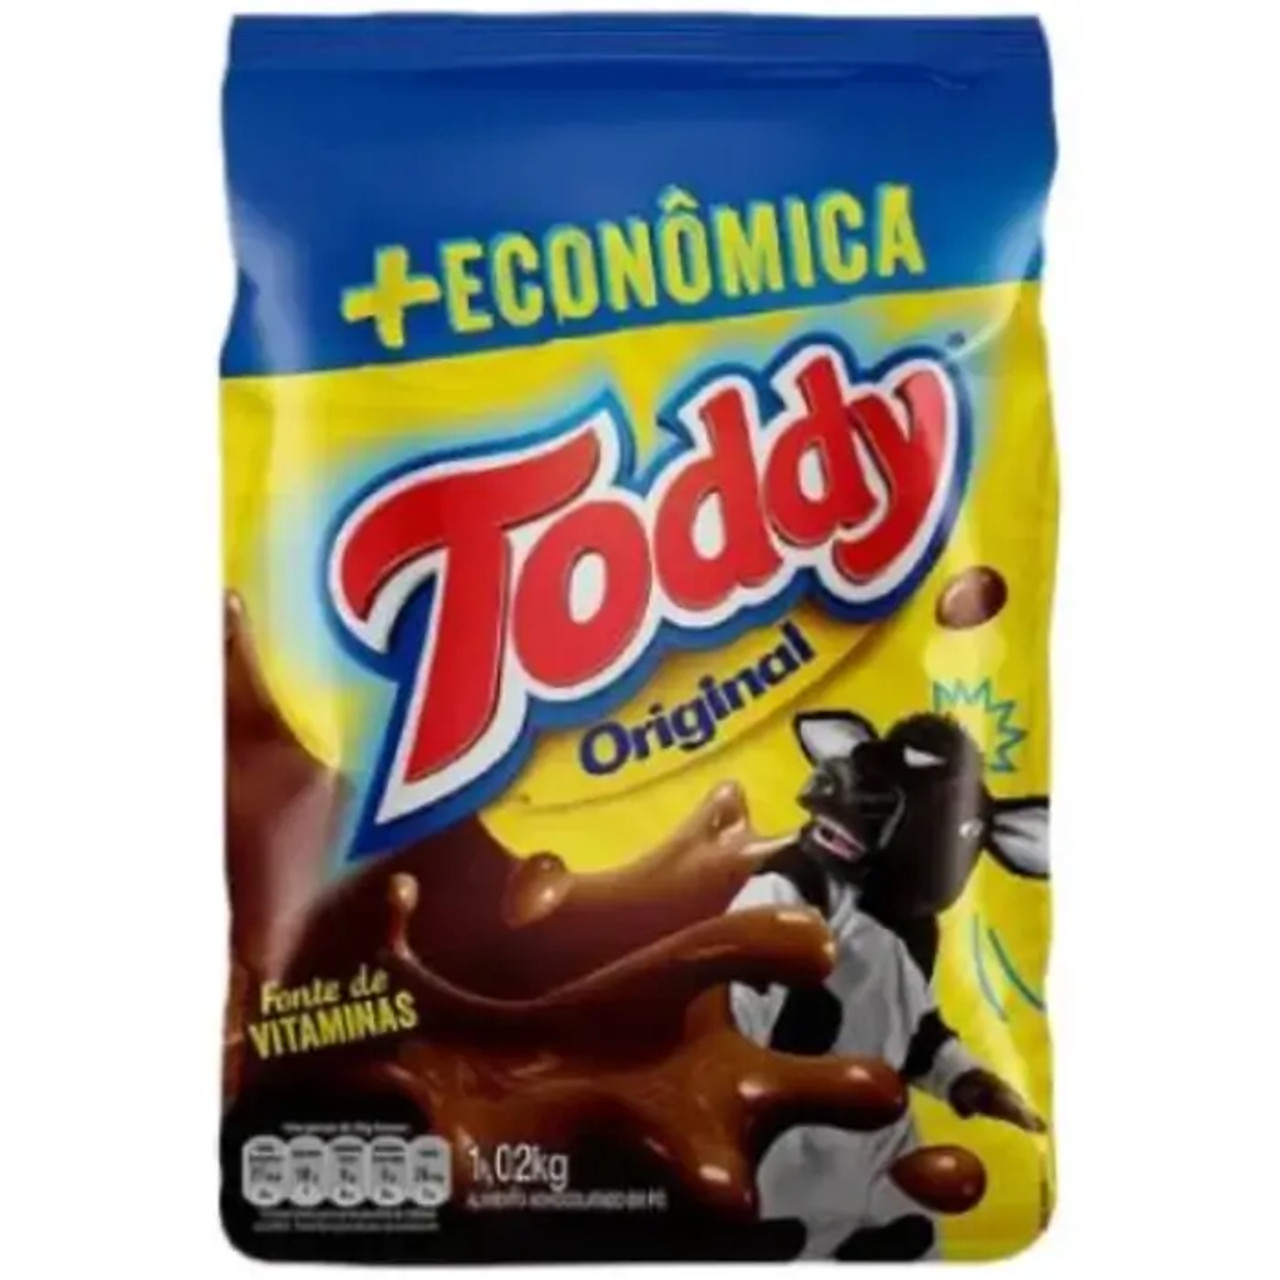 Toddy Cocoa Powder (6/Case) 1.8kg - Rich and Flavorful Chocolate Indulgence - Chicken Pieces